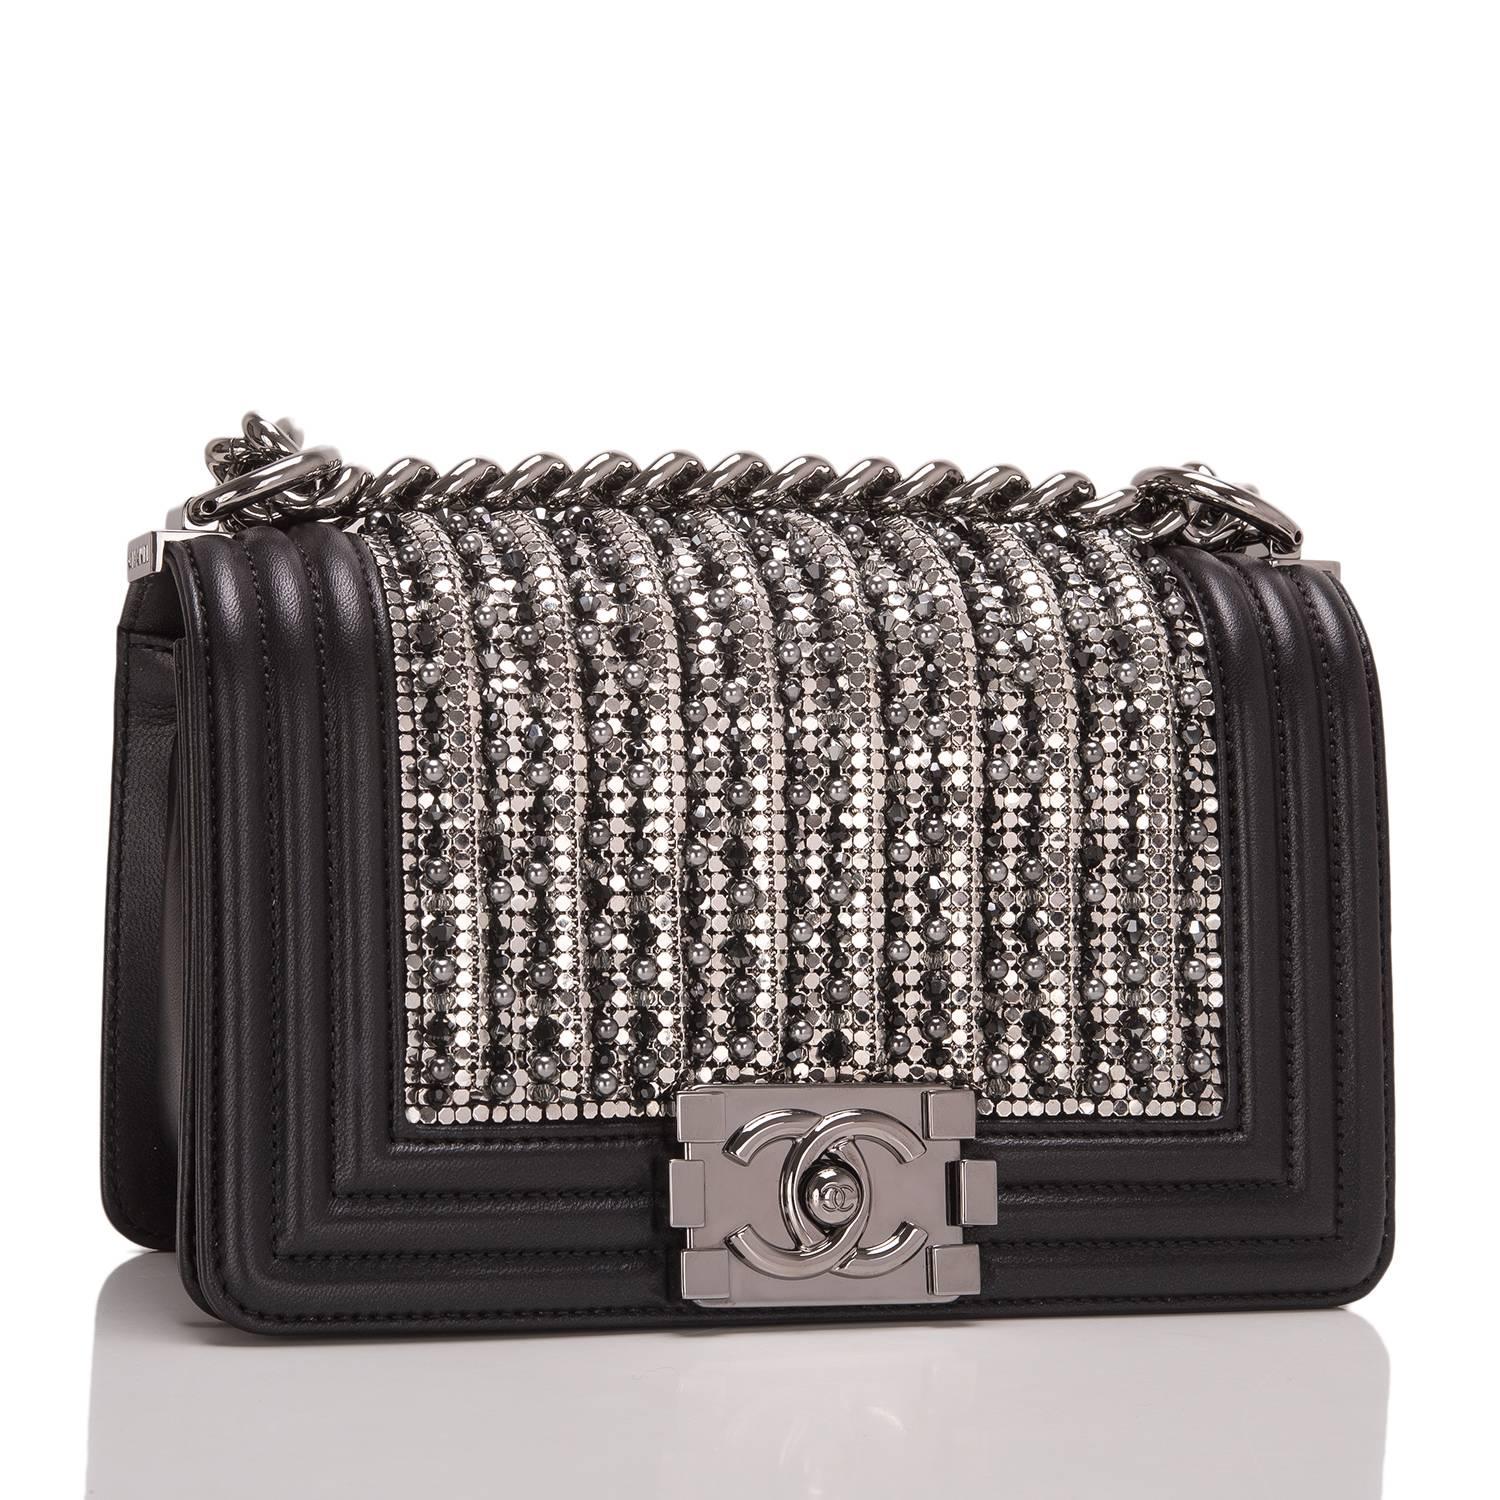 Chanel limited edition Small Boy bag of black lambskin leather with ruthenium hardware.

This rare, collectible bag features a front flap with Le Boy CC push lock closure, metallic glass and pearl embroideries in black and silver, and a ruthenium